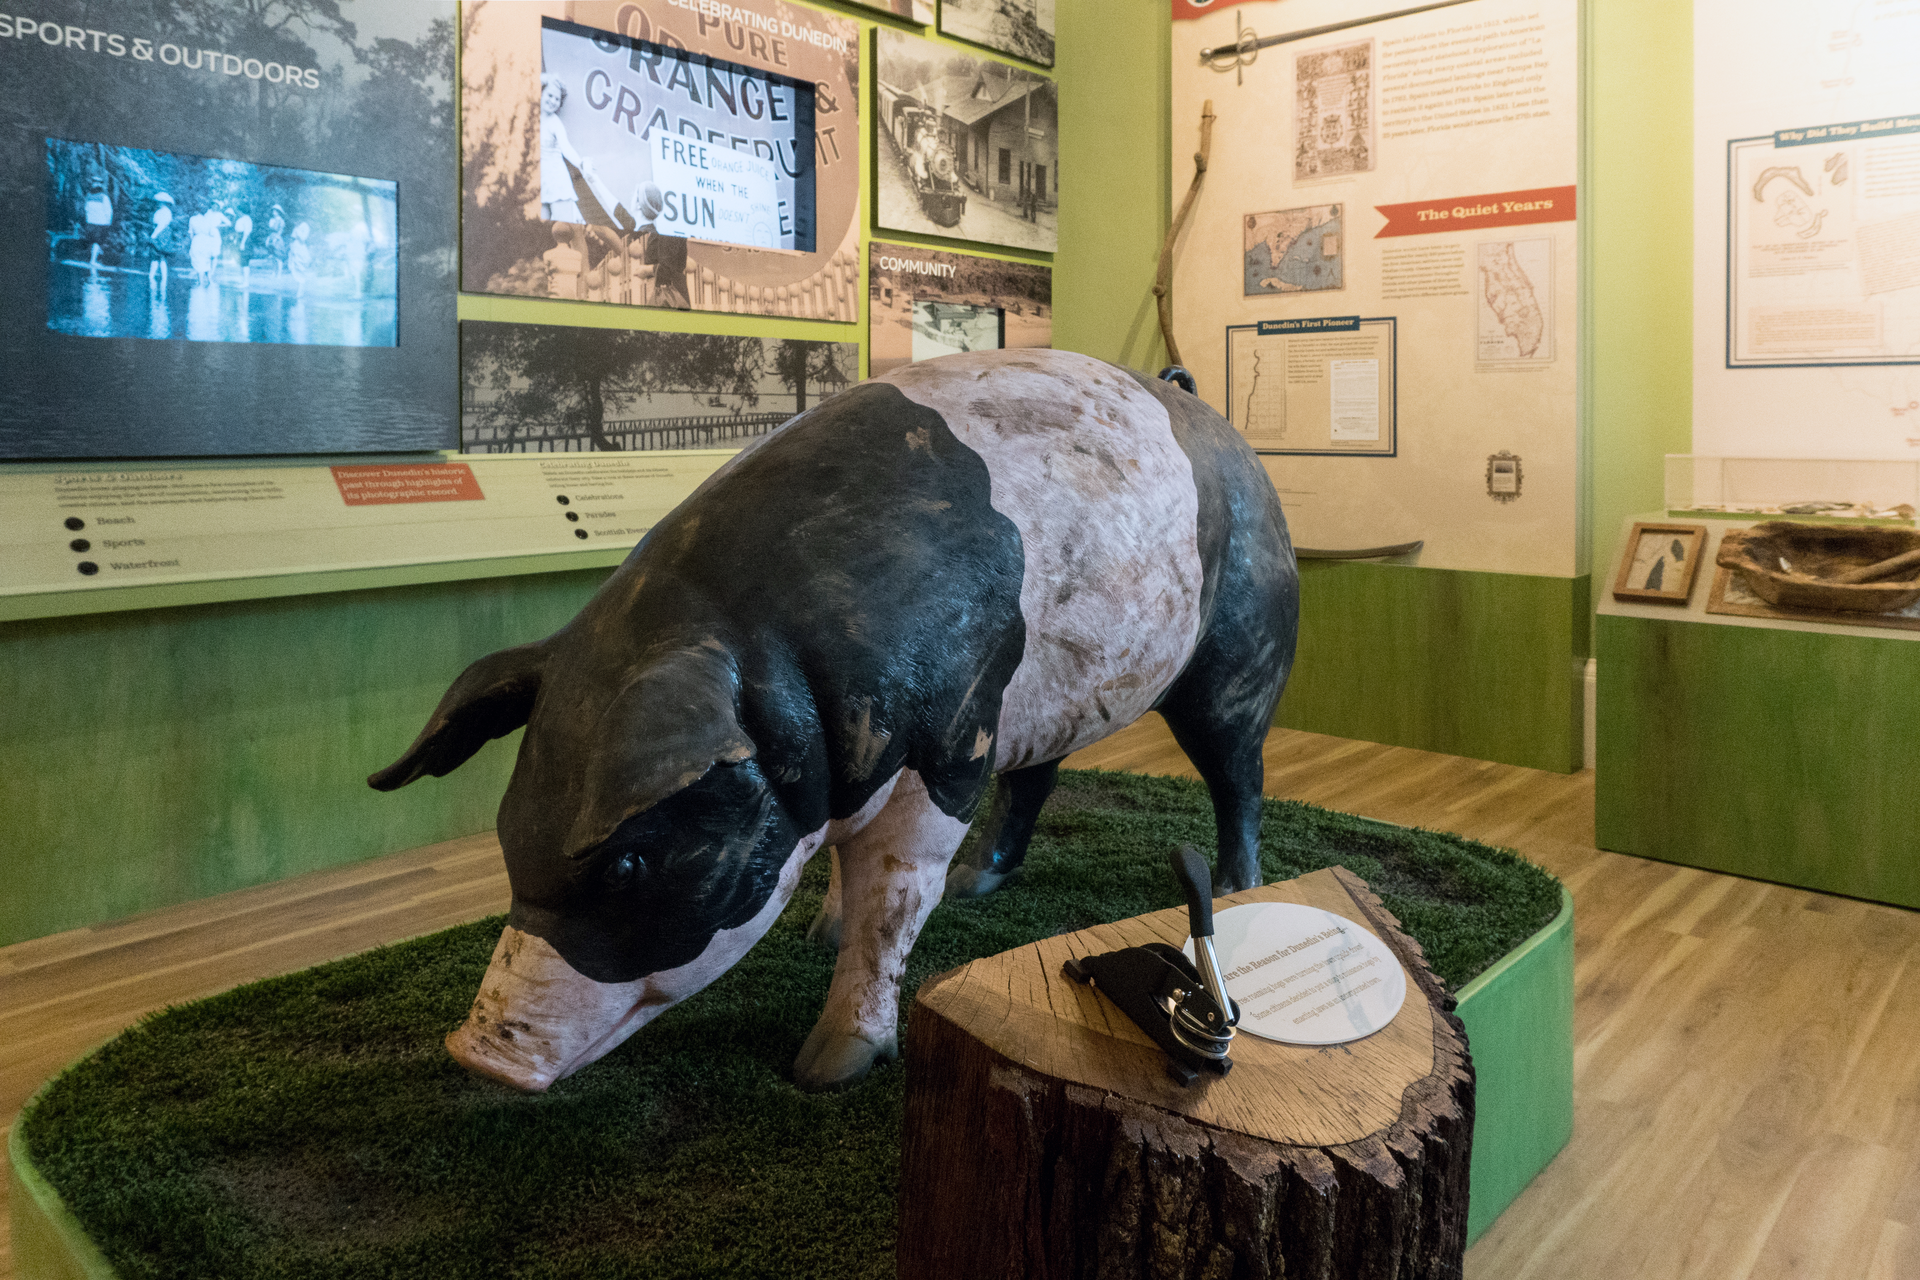 The hog holds a place of honor in the center of this gallery, surrounded by displays devoted to Dunedin’s first residents. - Jennifer Ring